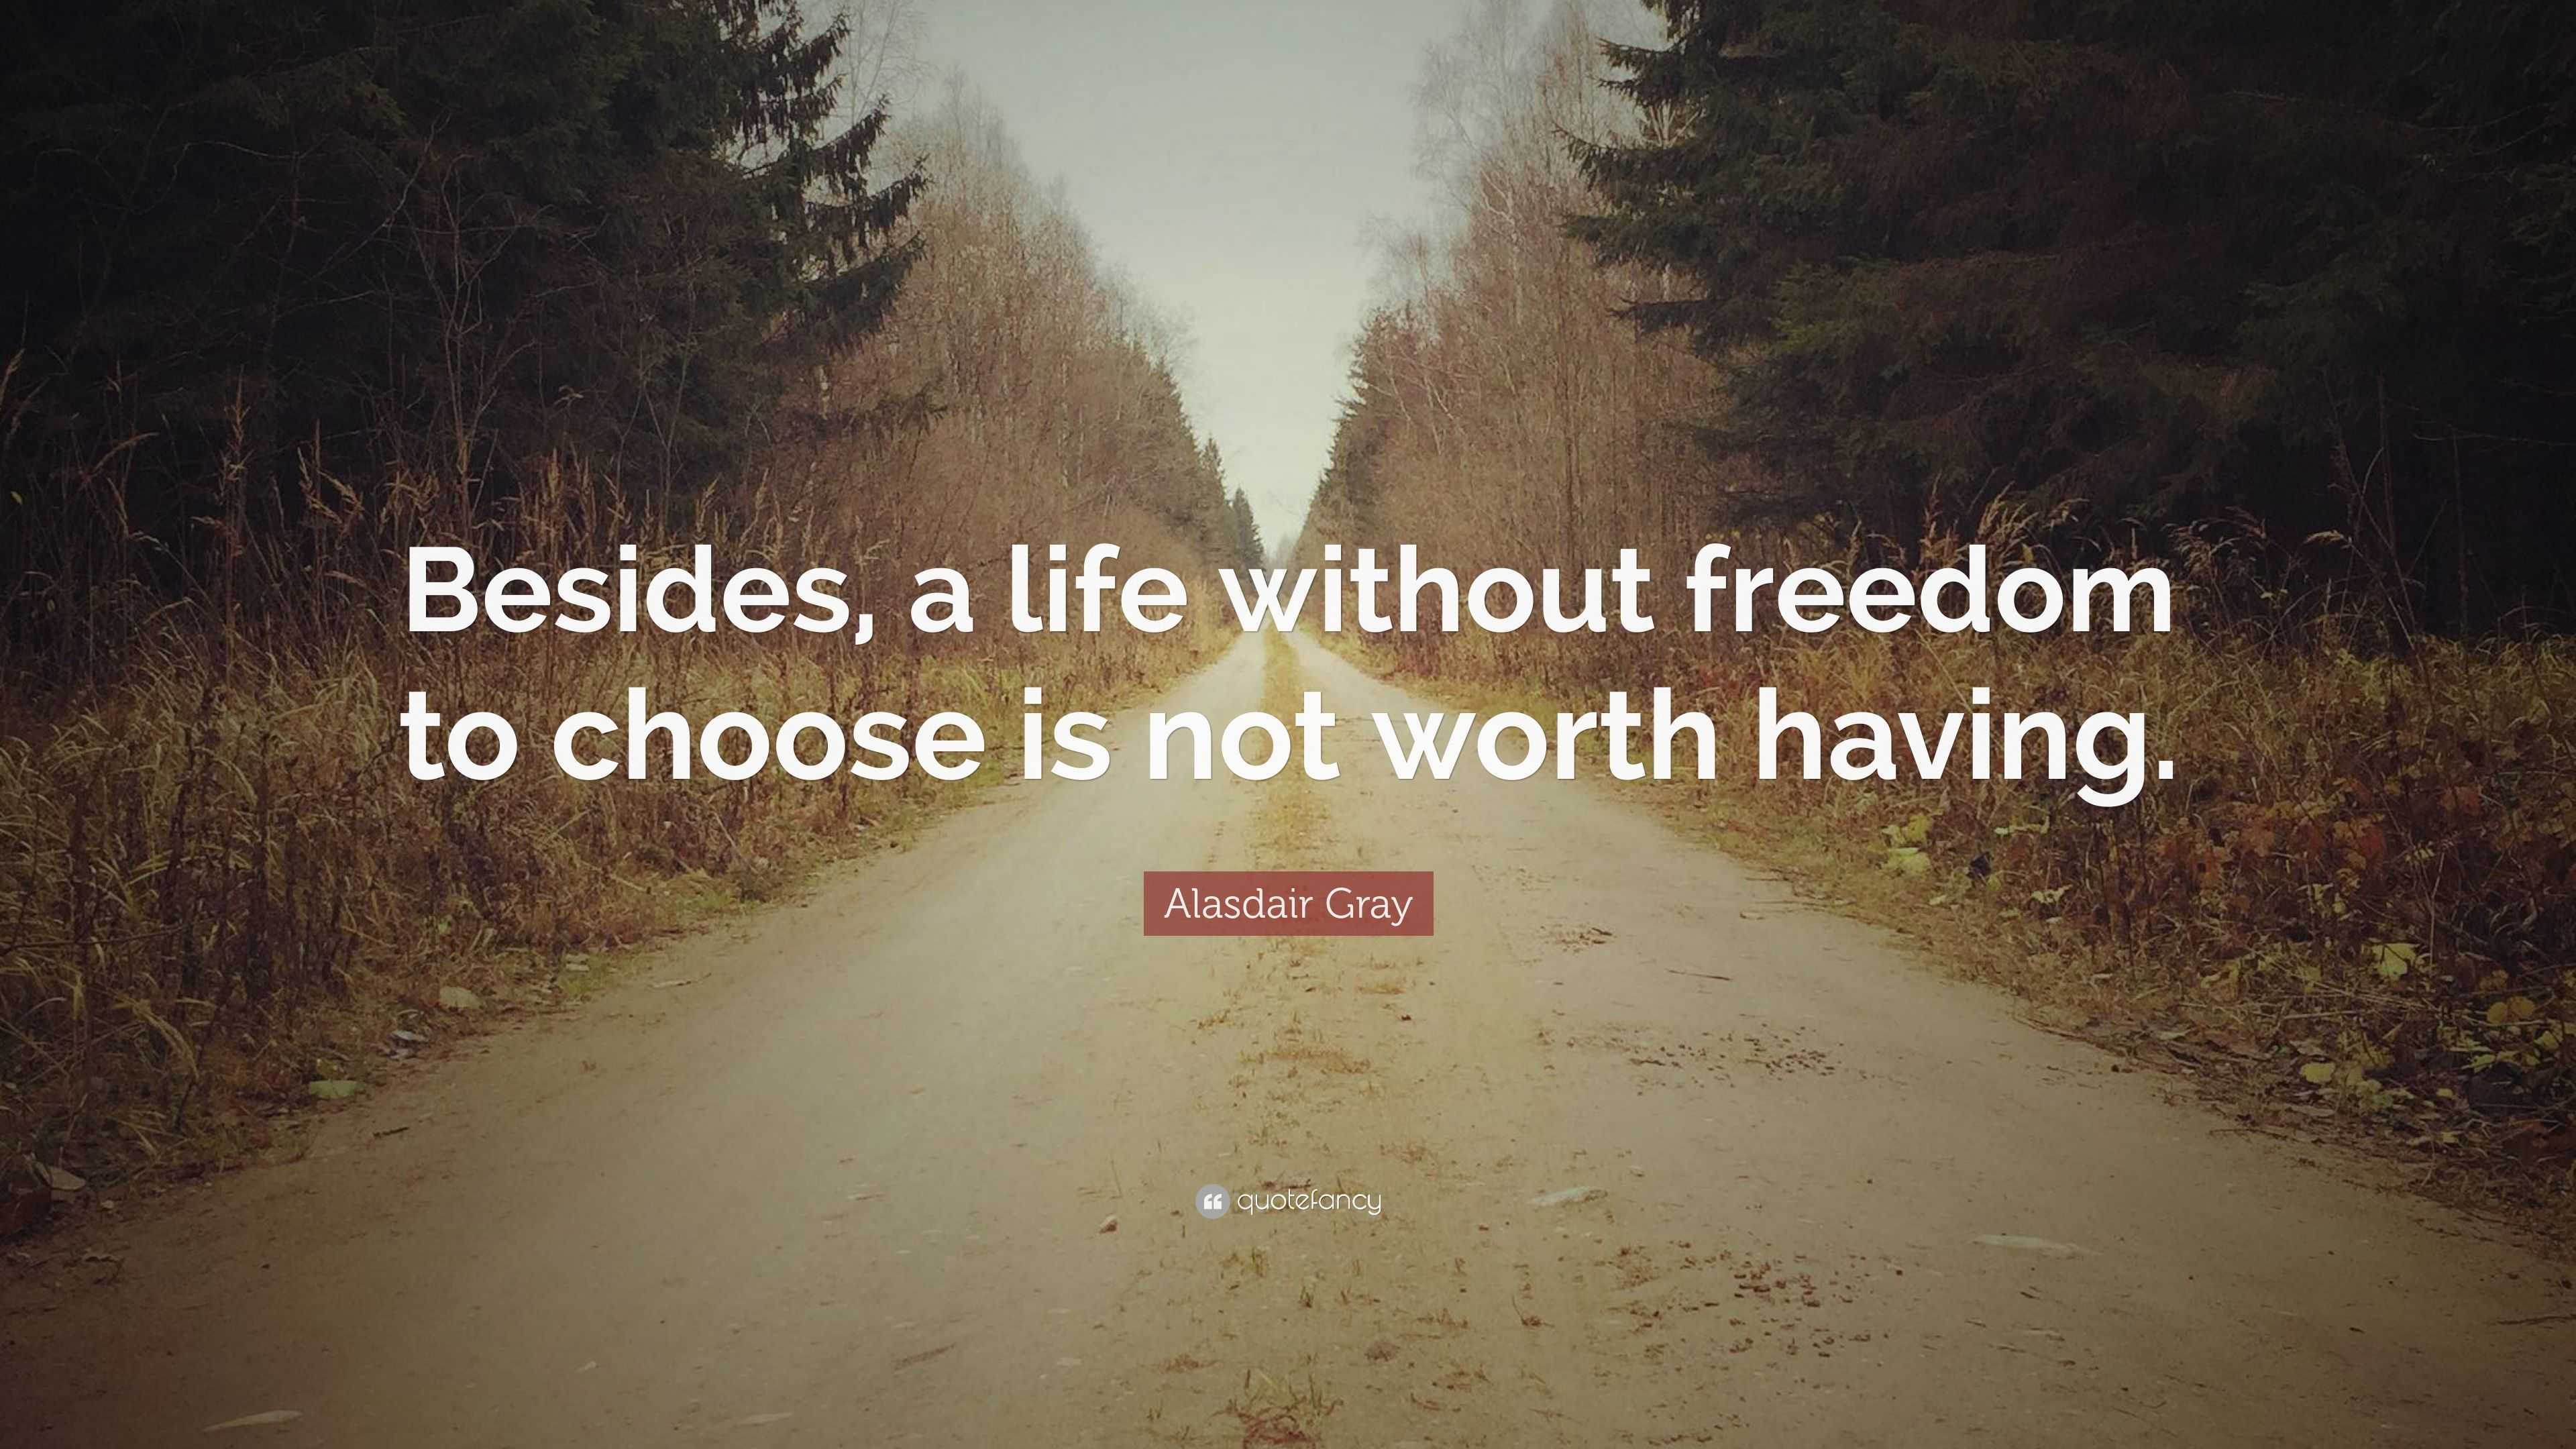 Alasdair Gray Quote “Besides a life without freedom to choose is not worth